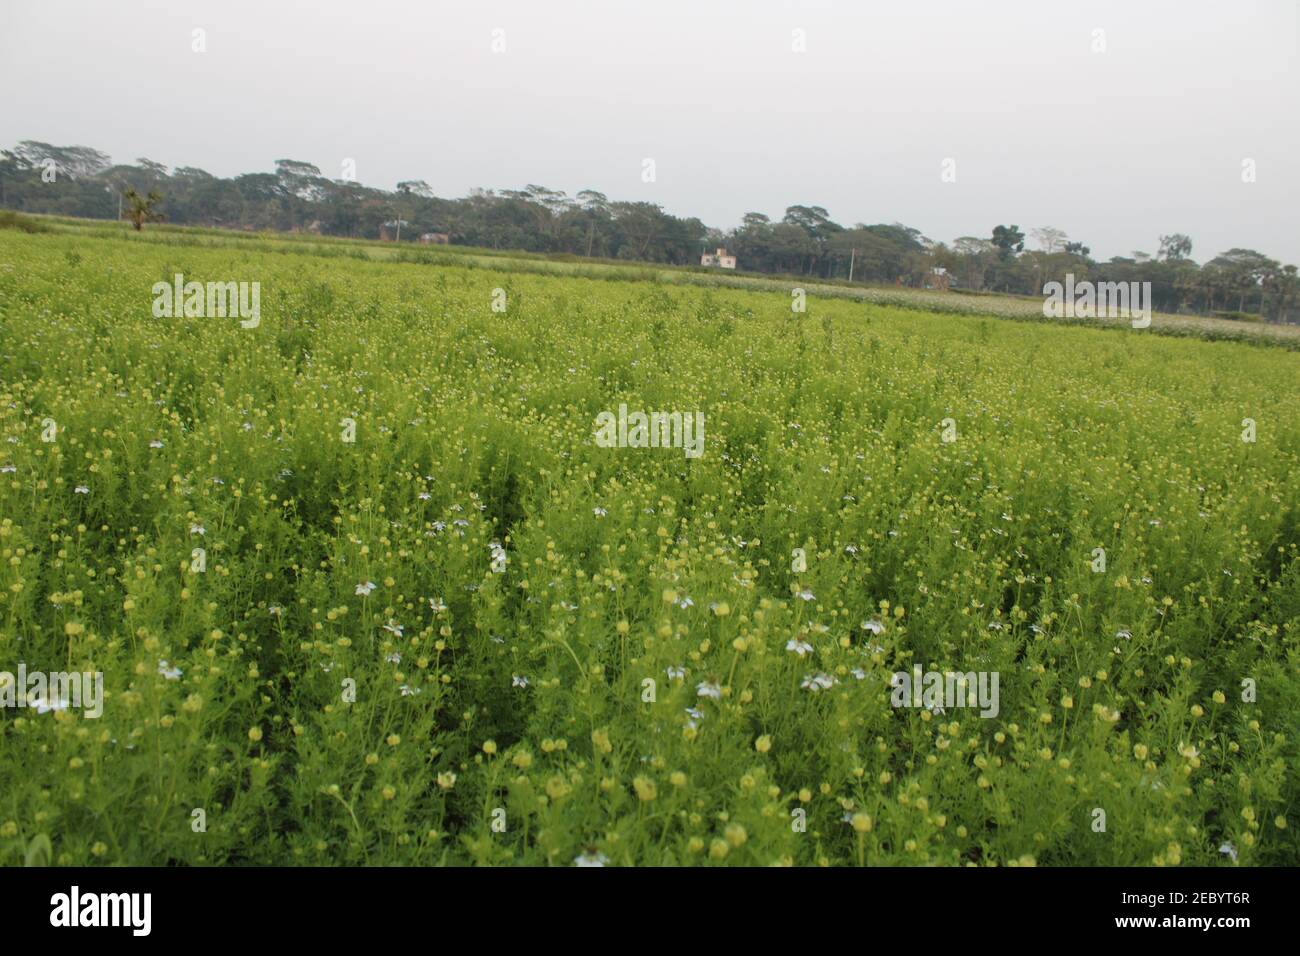 Fresh healthy vegetable food in the field photo capture from Bangladesh Stock Photo